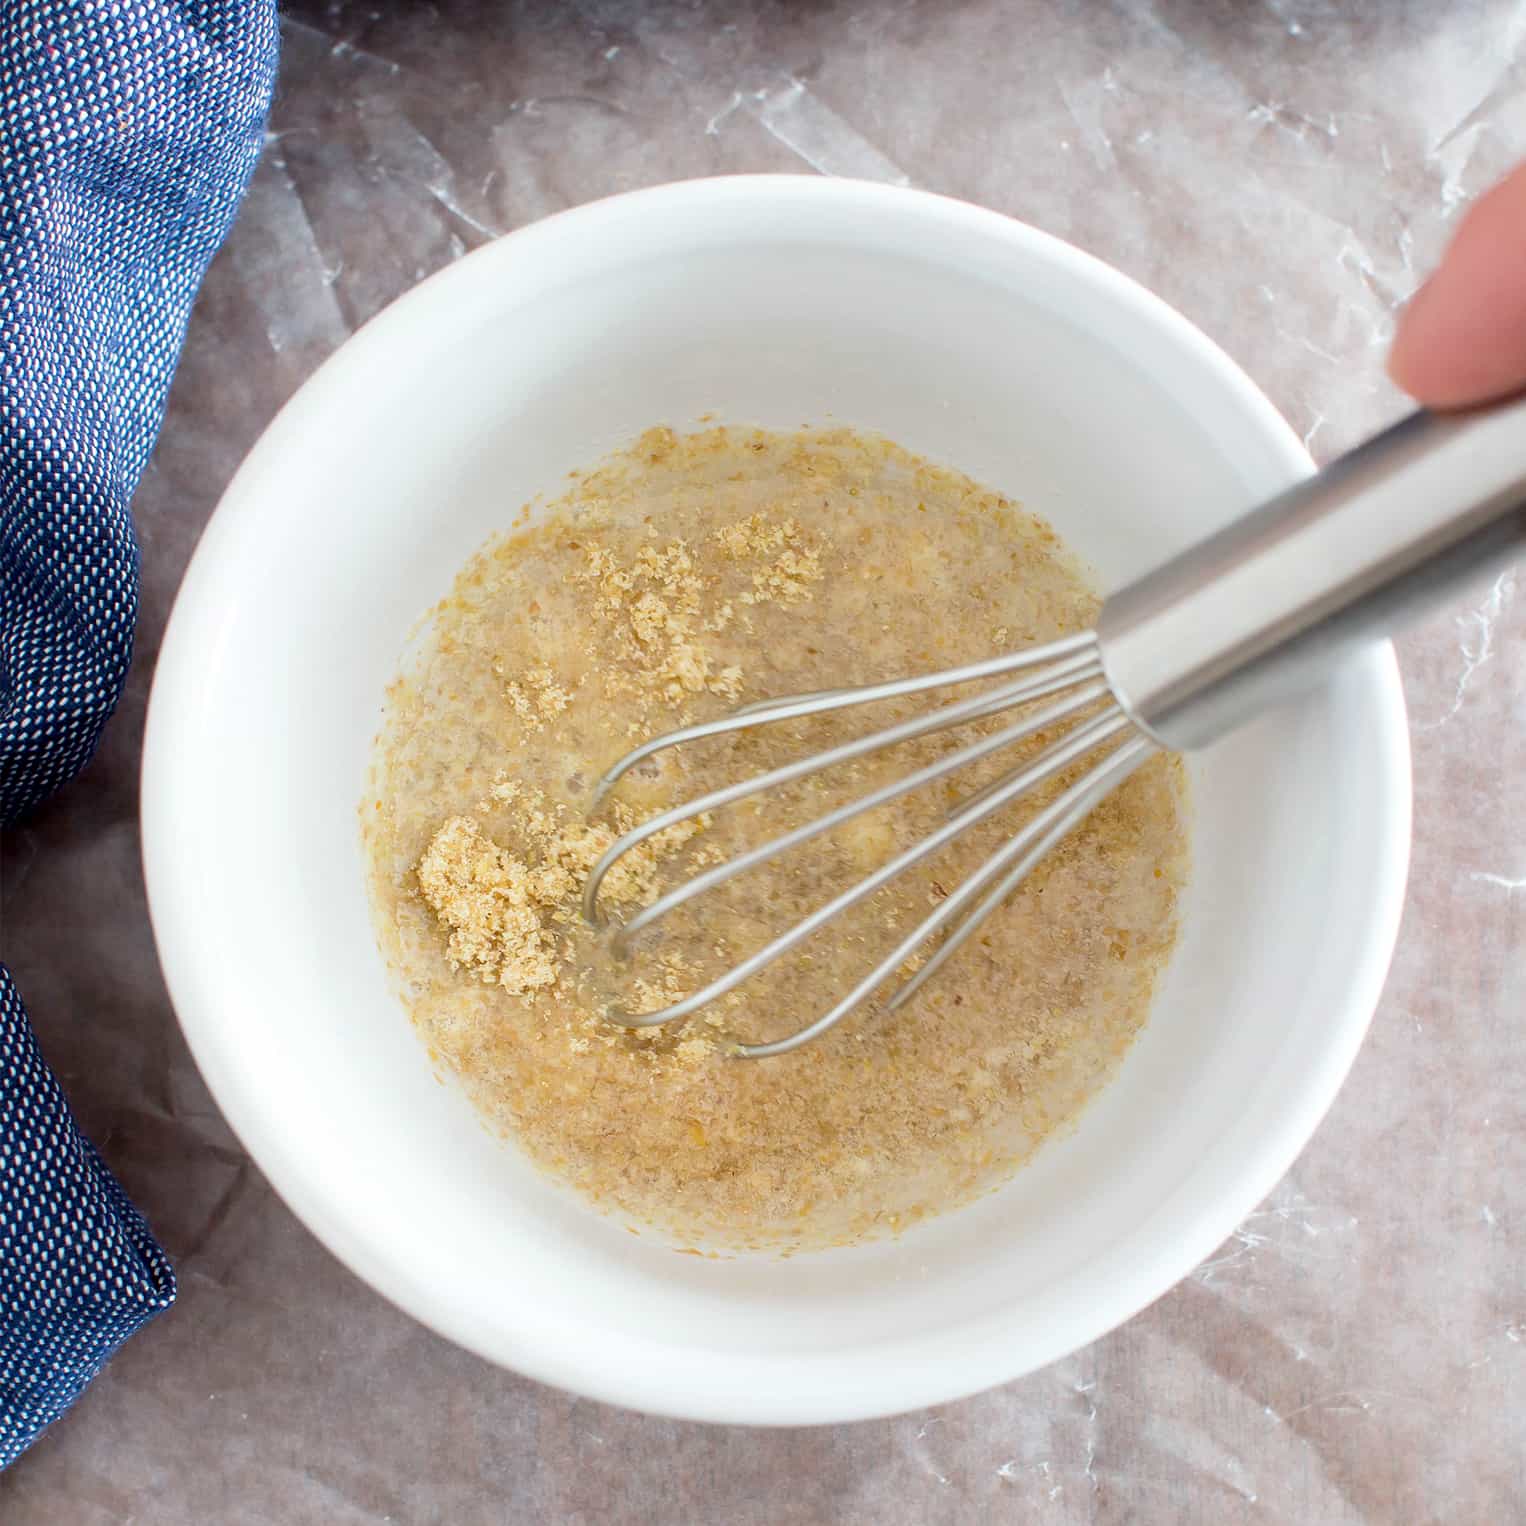 How to Make a Flax Egg (Vegan, Gluten-Free, Paleo, Dairy-Free Egg Replacement)